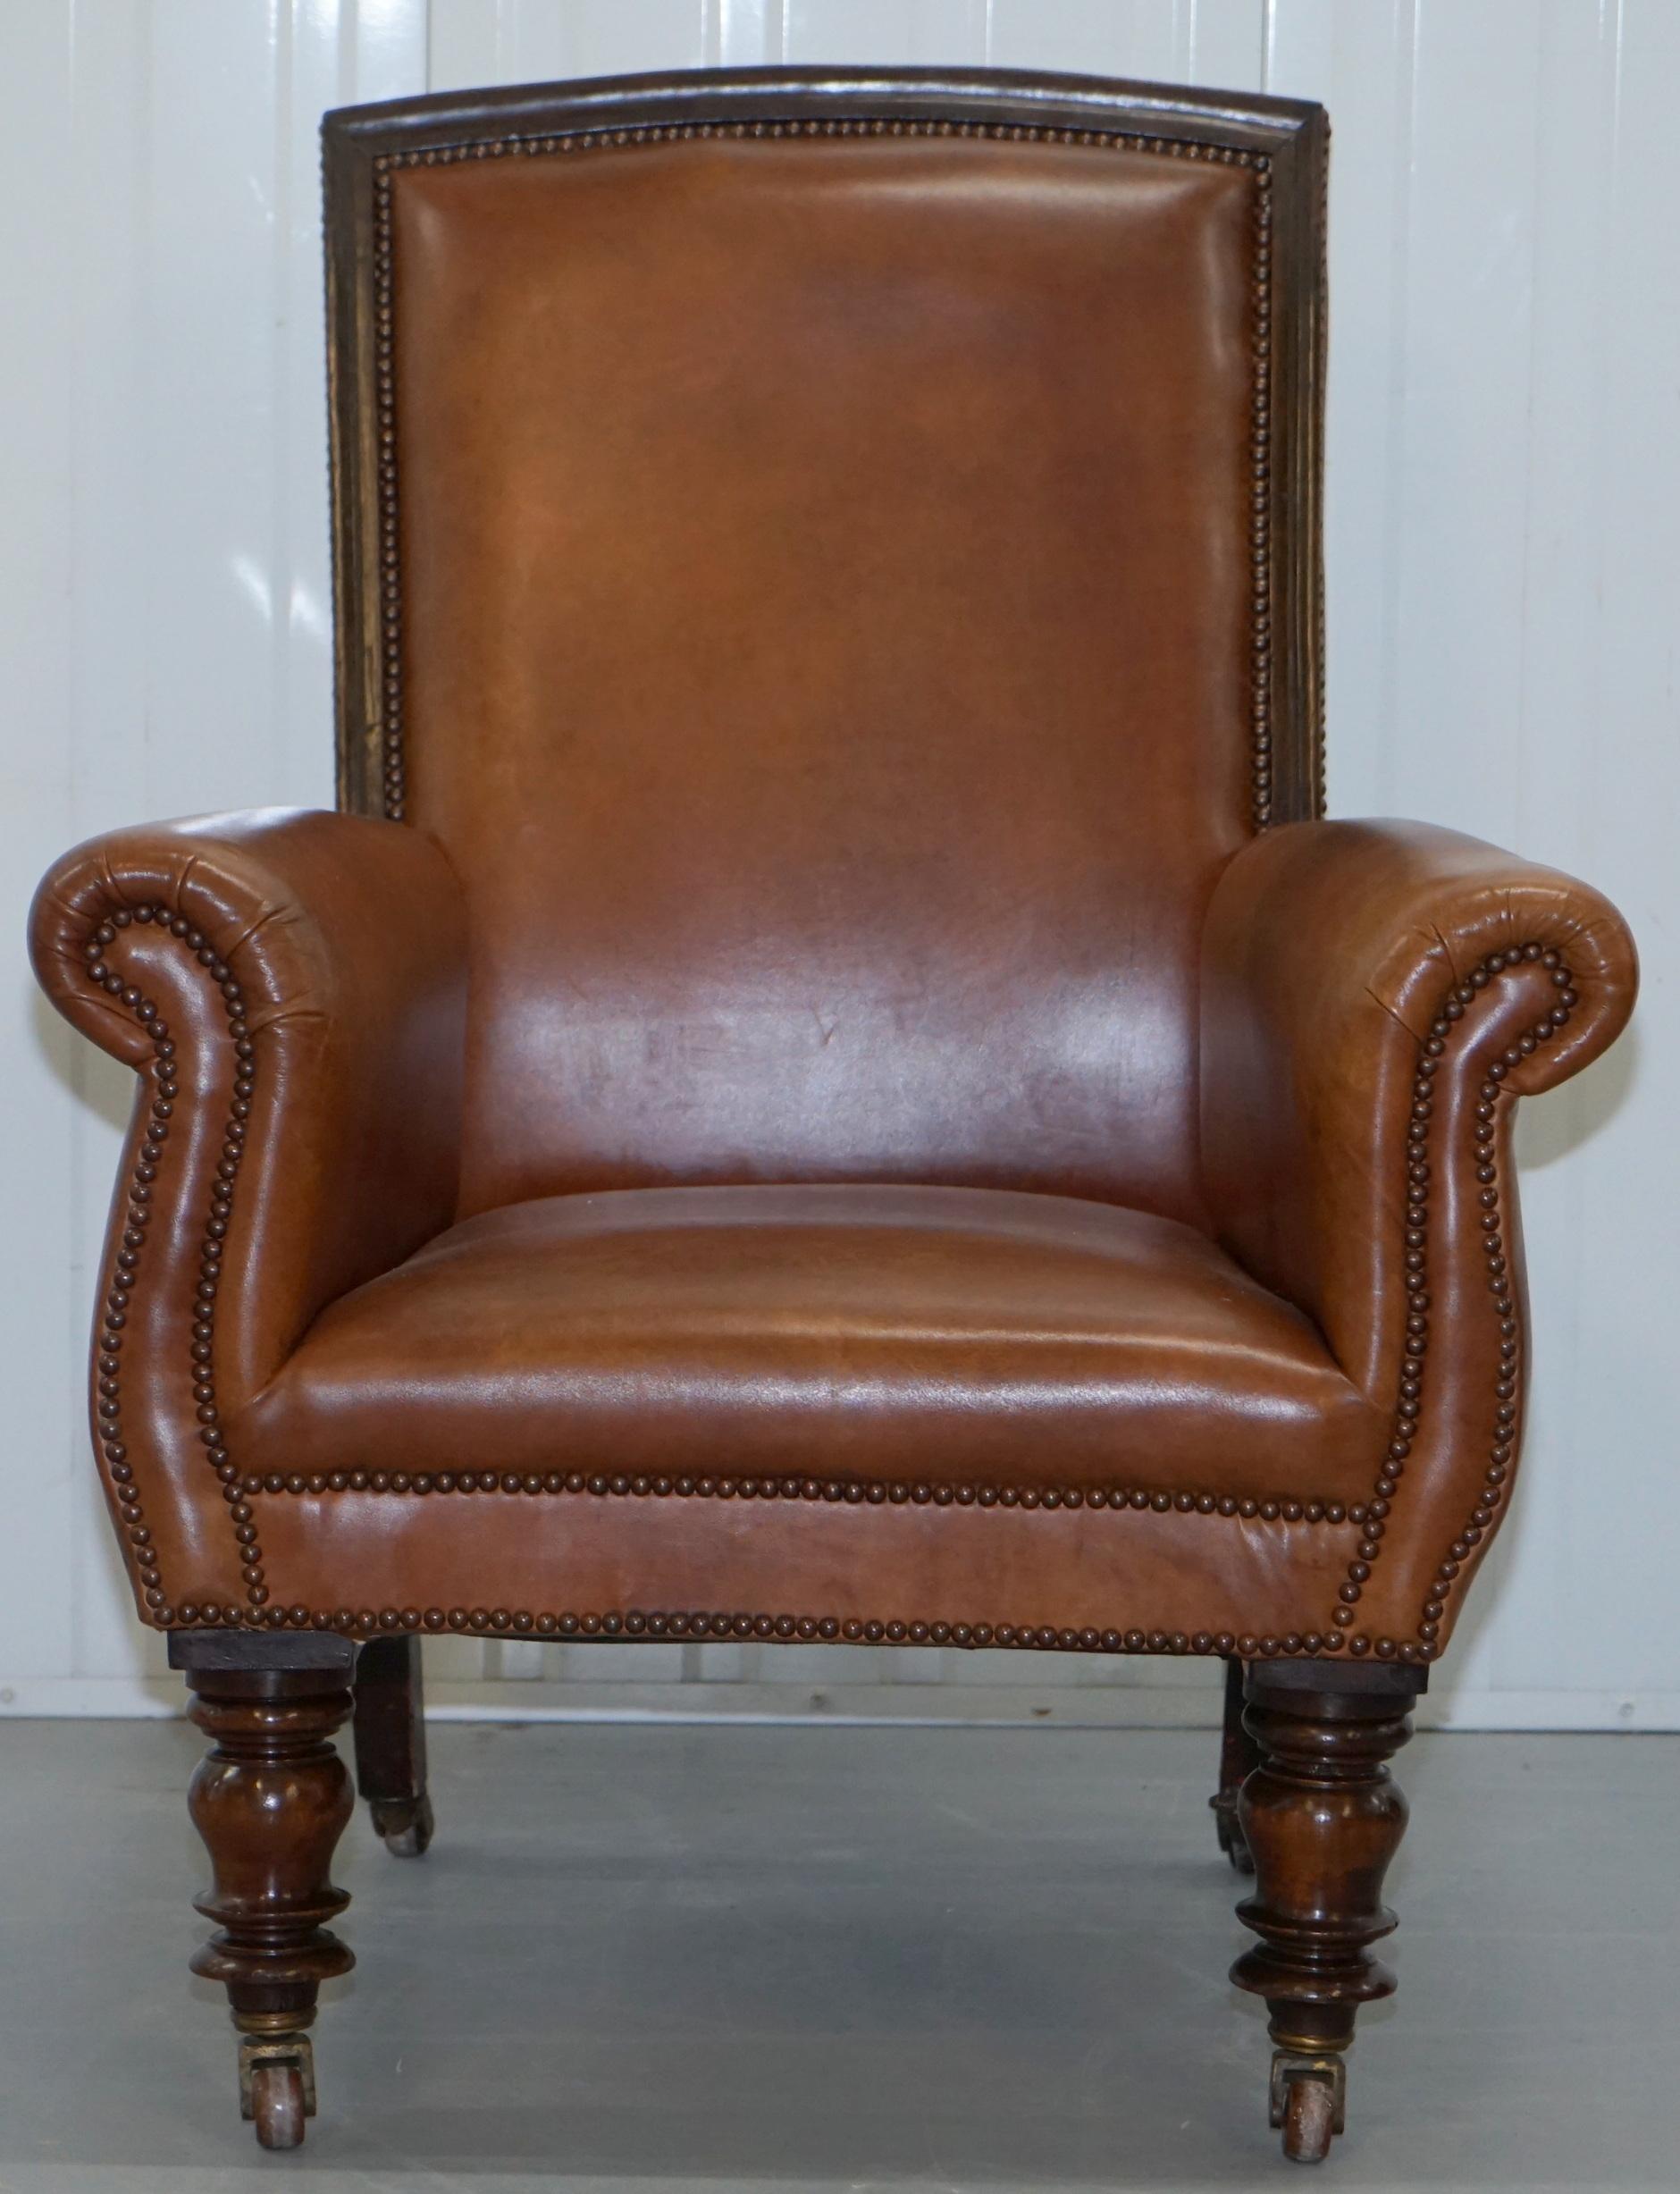 We are delighted to offer for sale this lovely restored Victorian library reading armchair in vintage aged brown leather

A good looking and very well made chair, the chair legs are exceptionally chunky on the front and finished with period